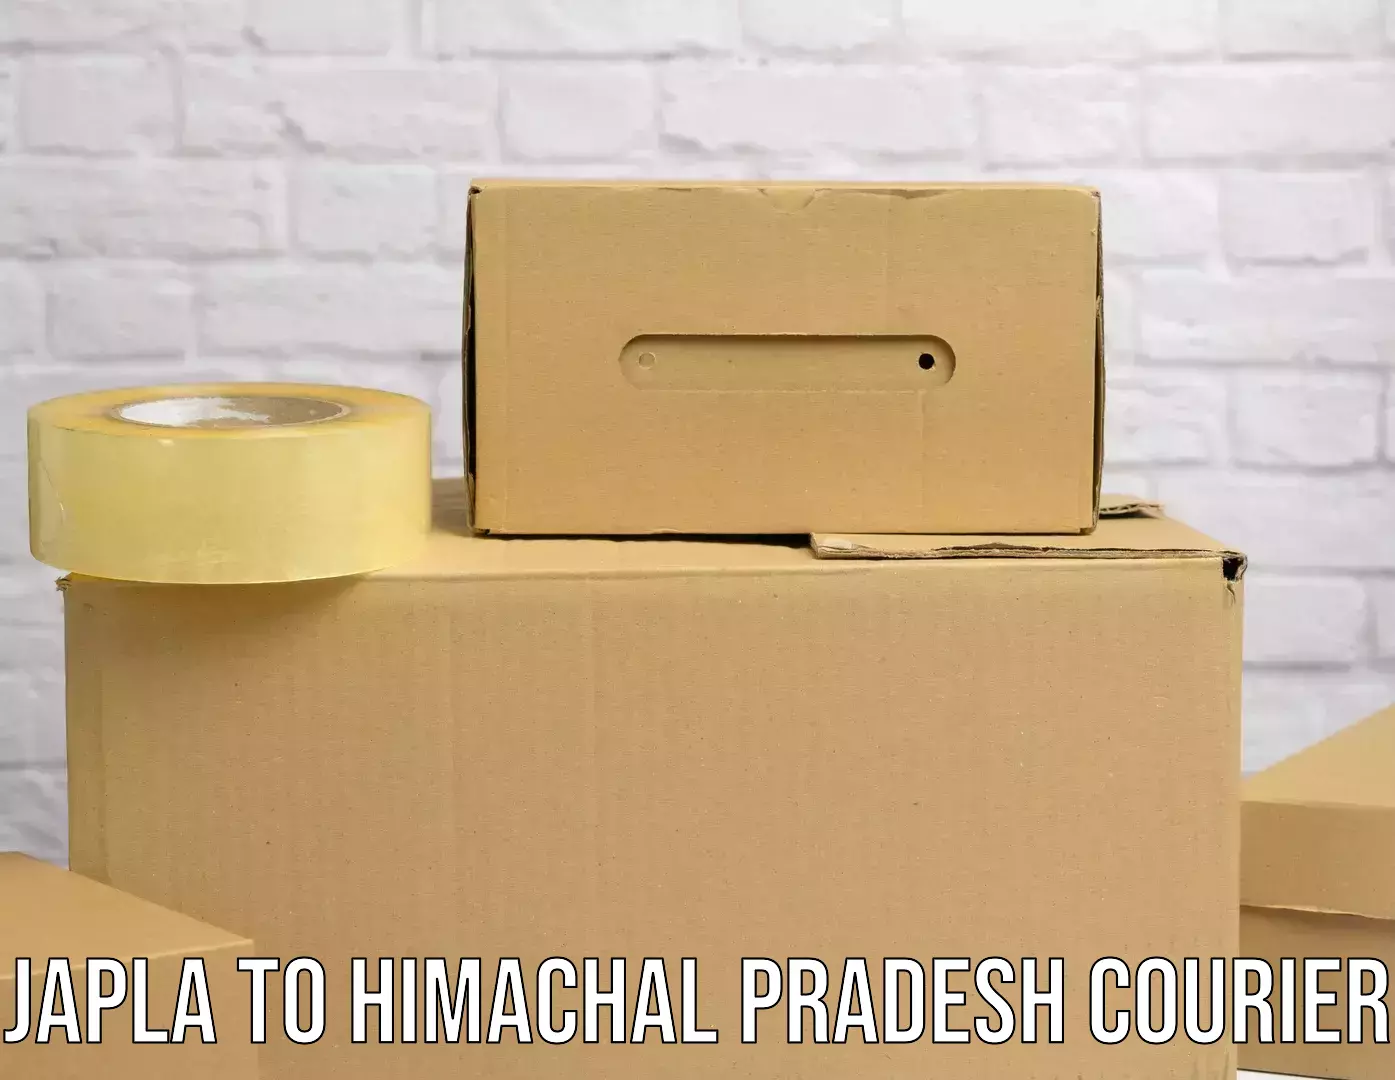 Cost-effective courier options Japla to Himachal Pradesh